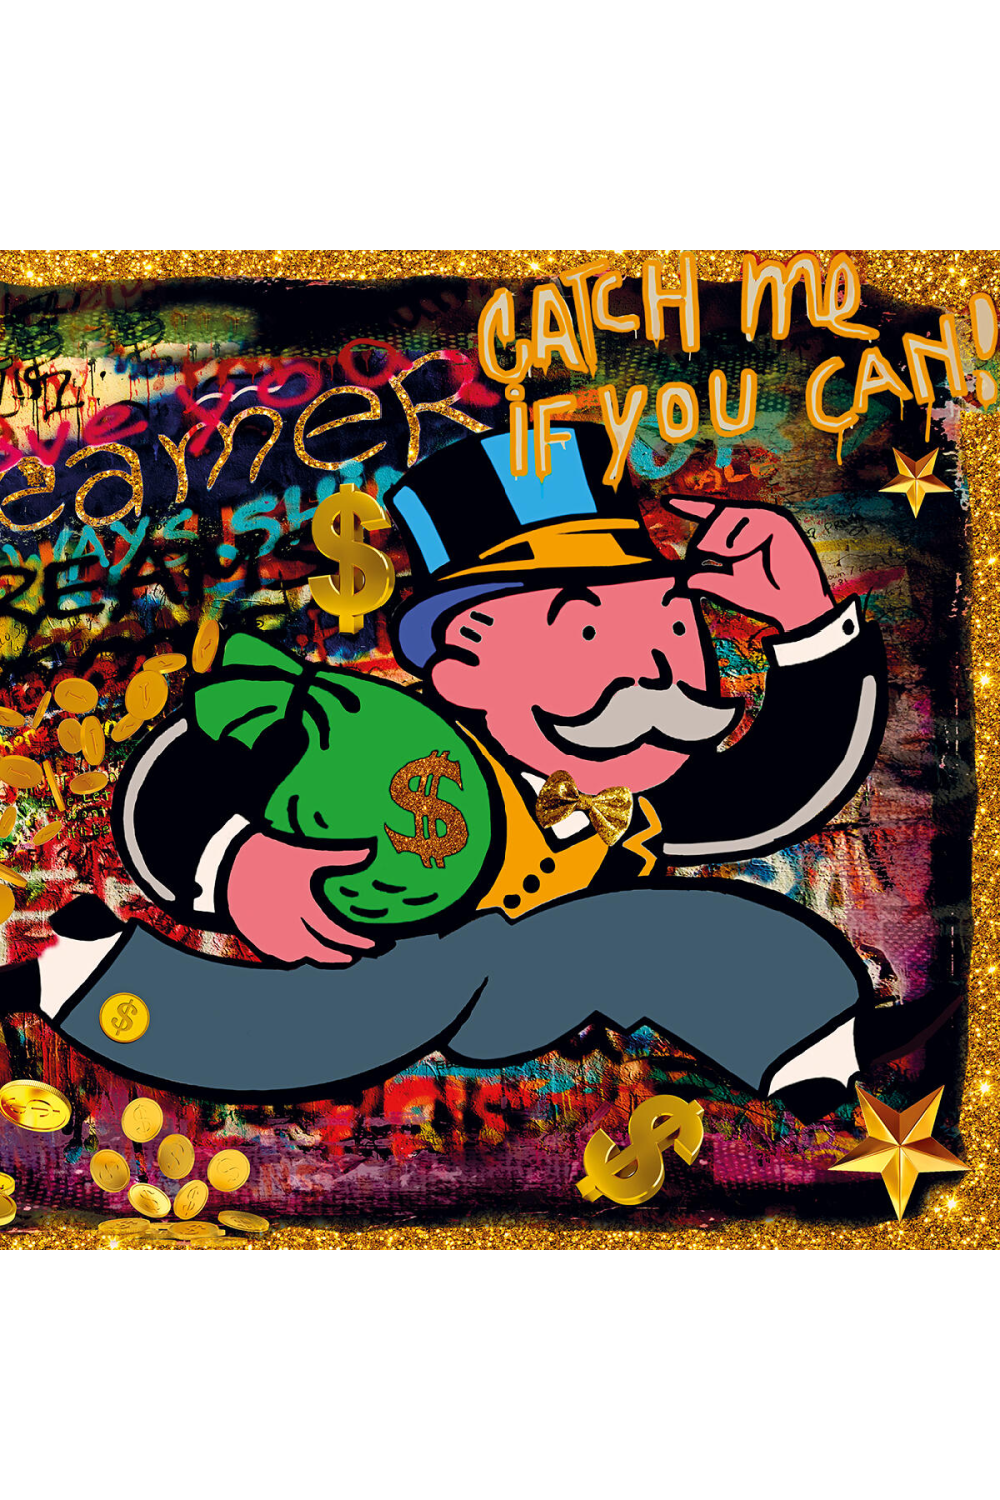 Graffiti Photographic Art | Andrew Martin Catch Me If You Can